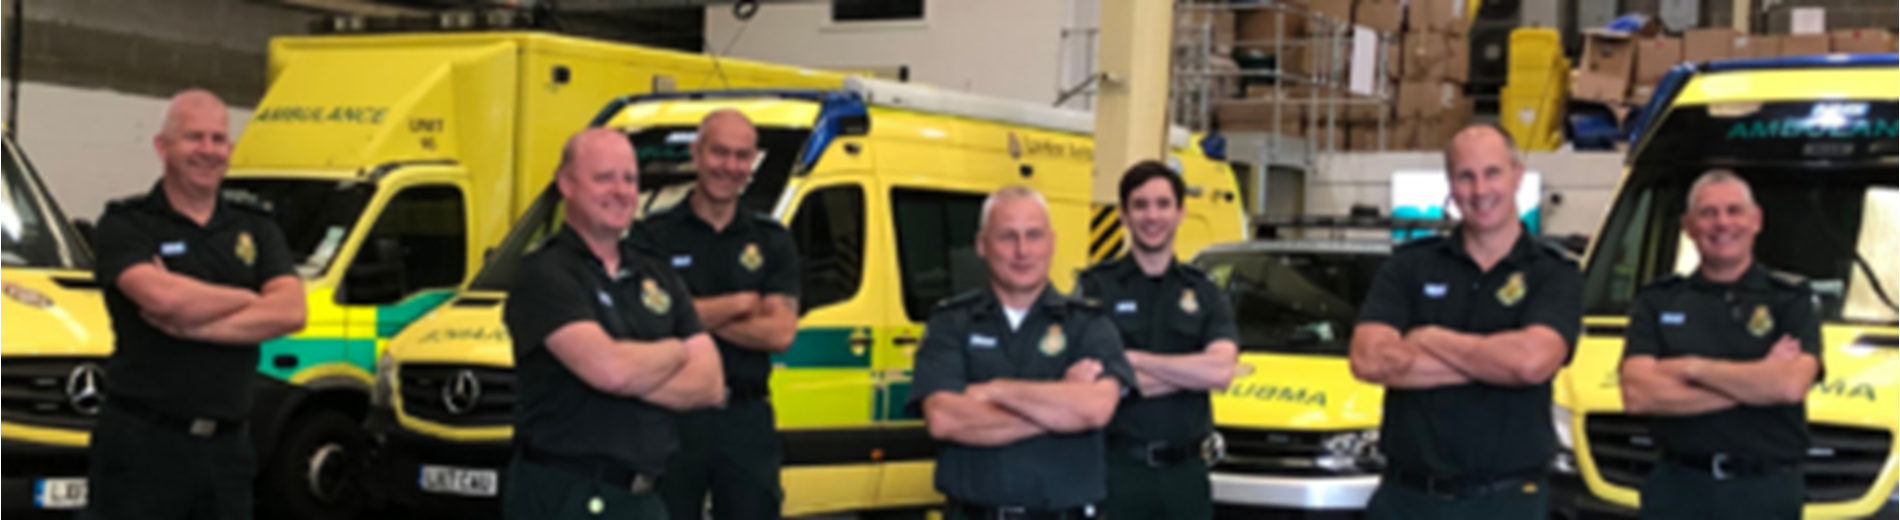 Paramedic nominates colleagues who helped save his life for an award